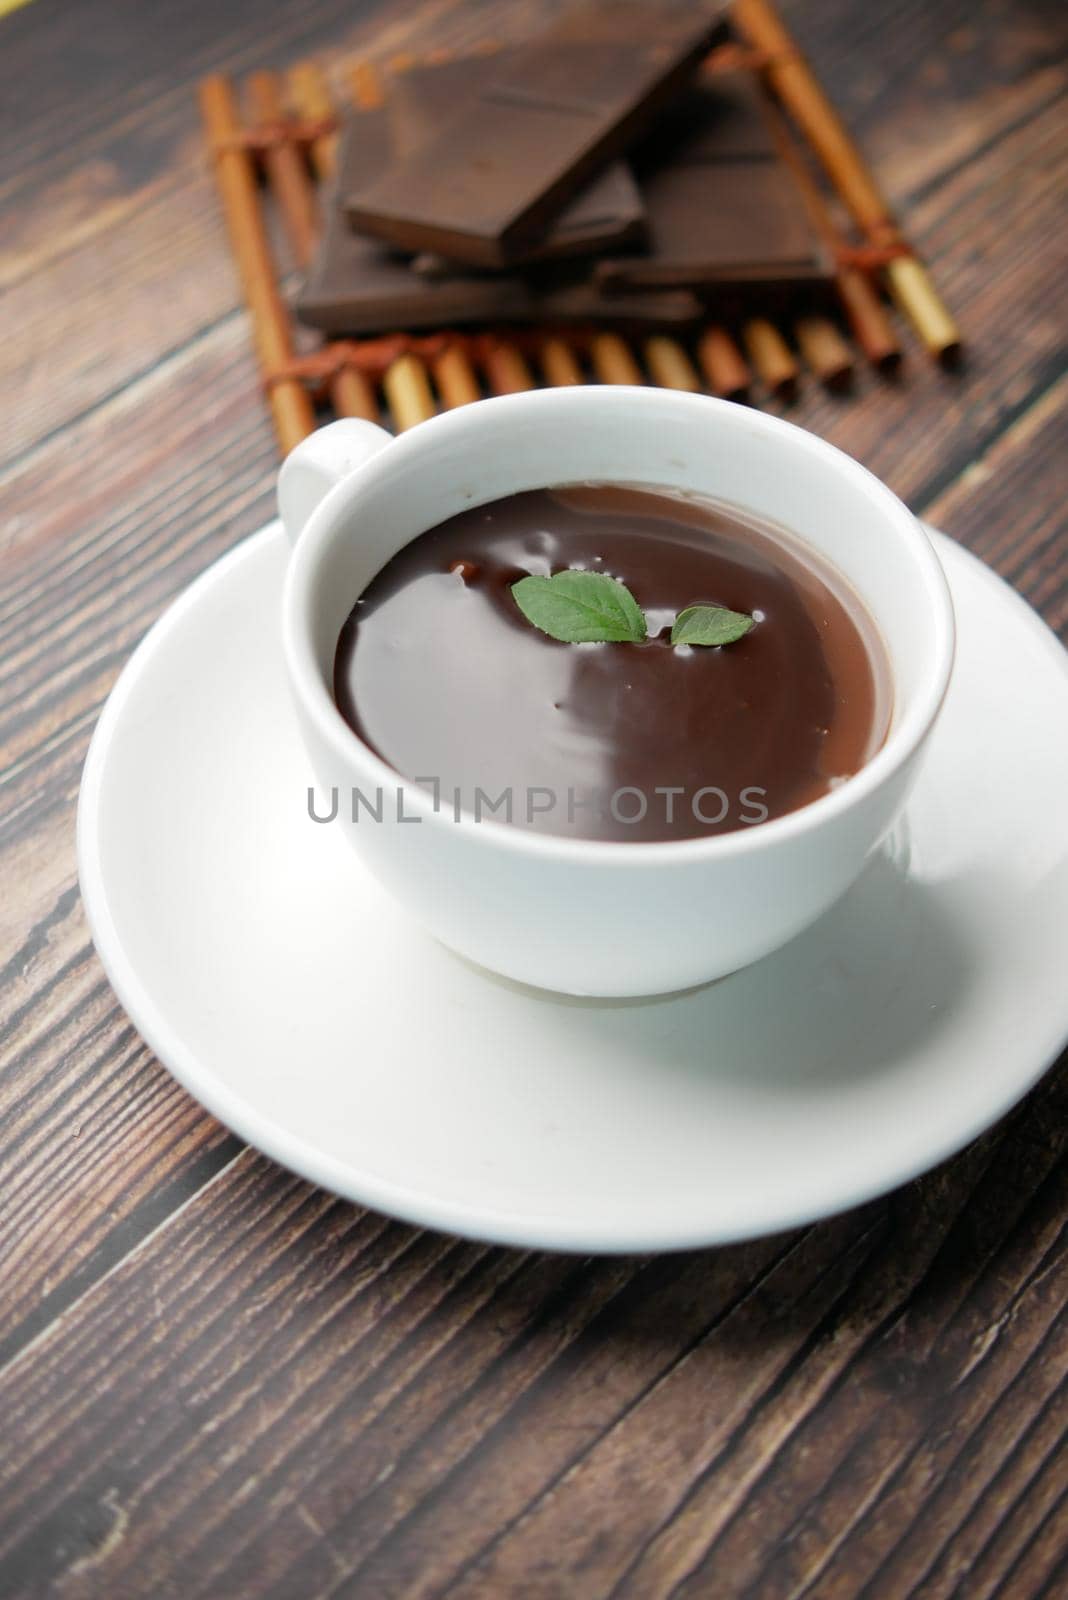 dark chocolate cream in a coffee cup on table by towfiq007